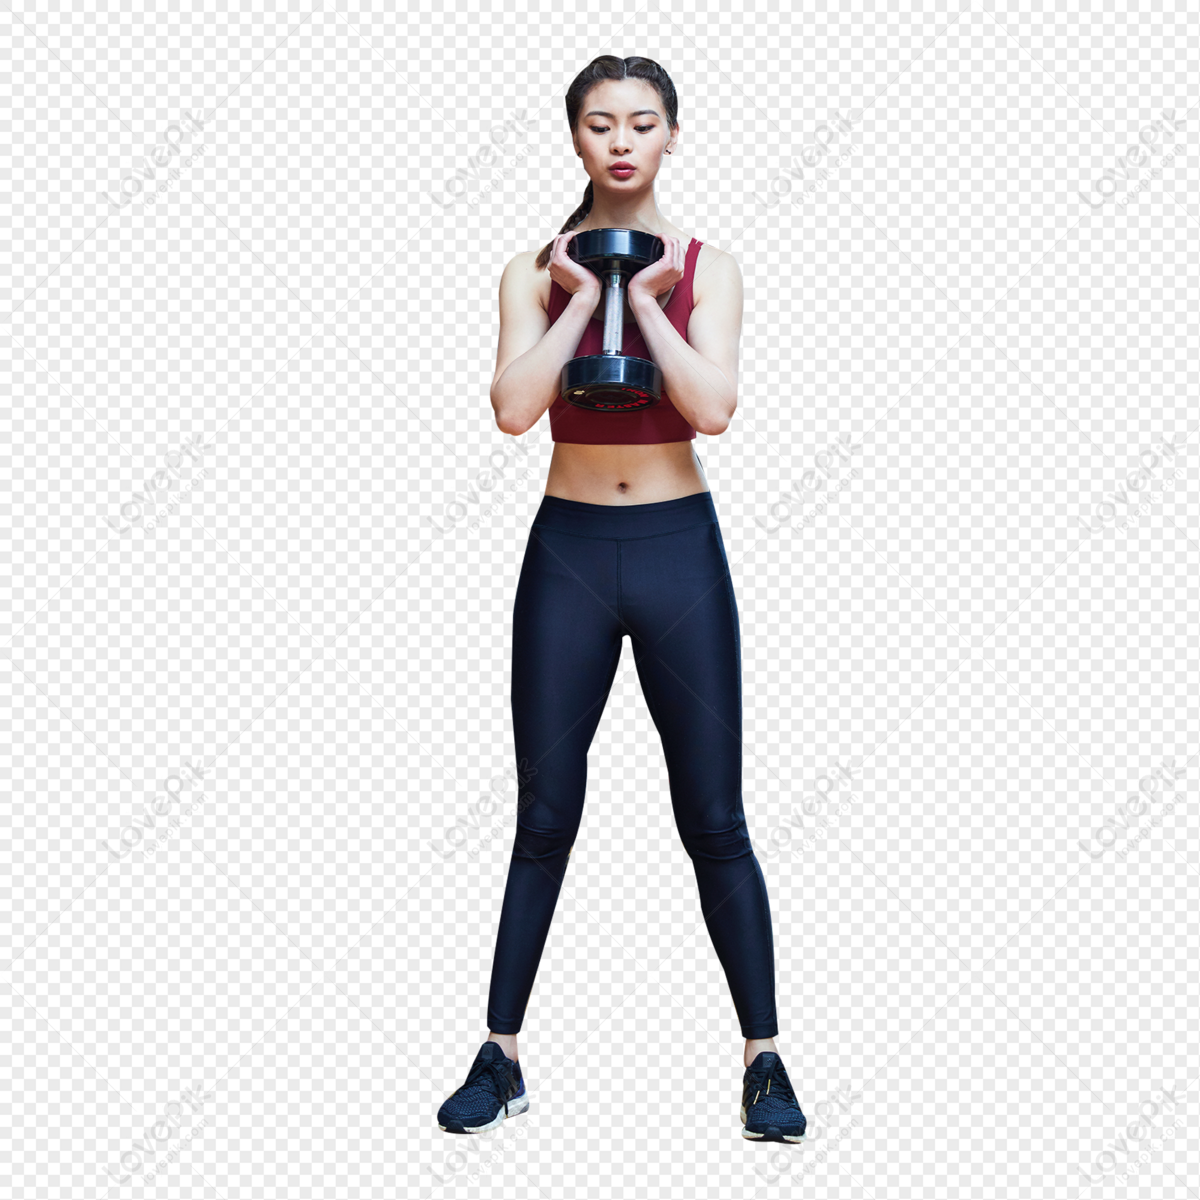 Female Working Out In Gym PNG Transparent Background And Clipart Image For  Free Download - Lovepik | 401622130